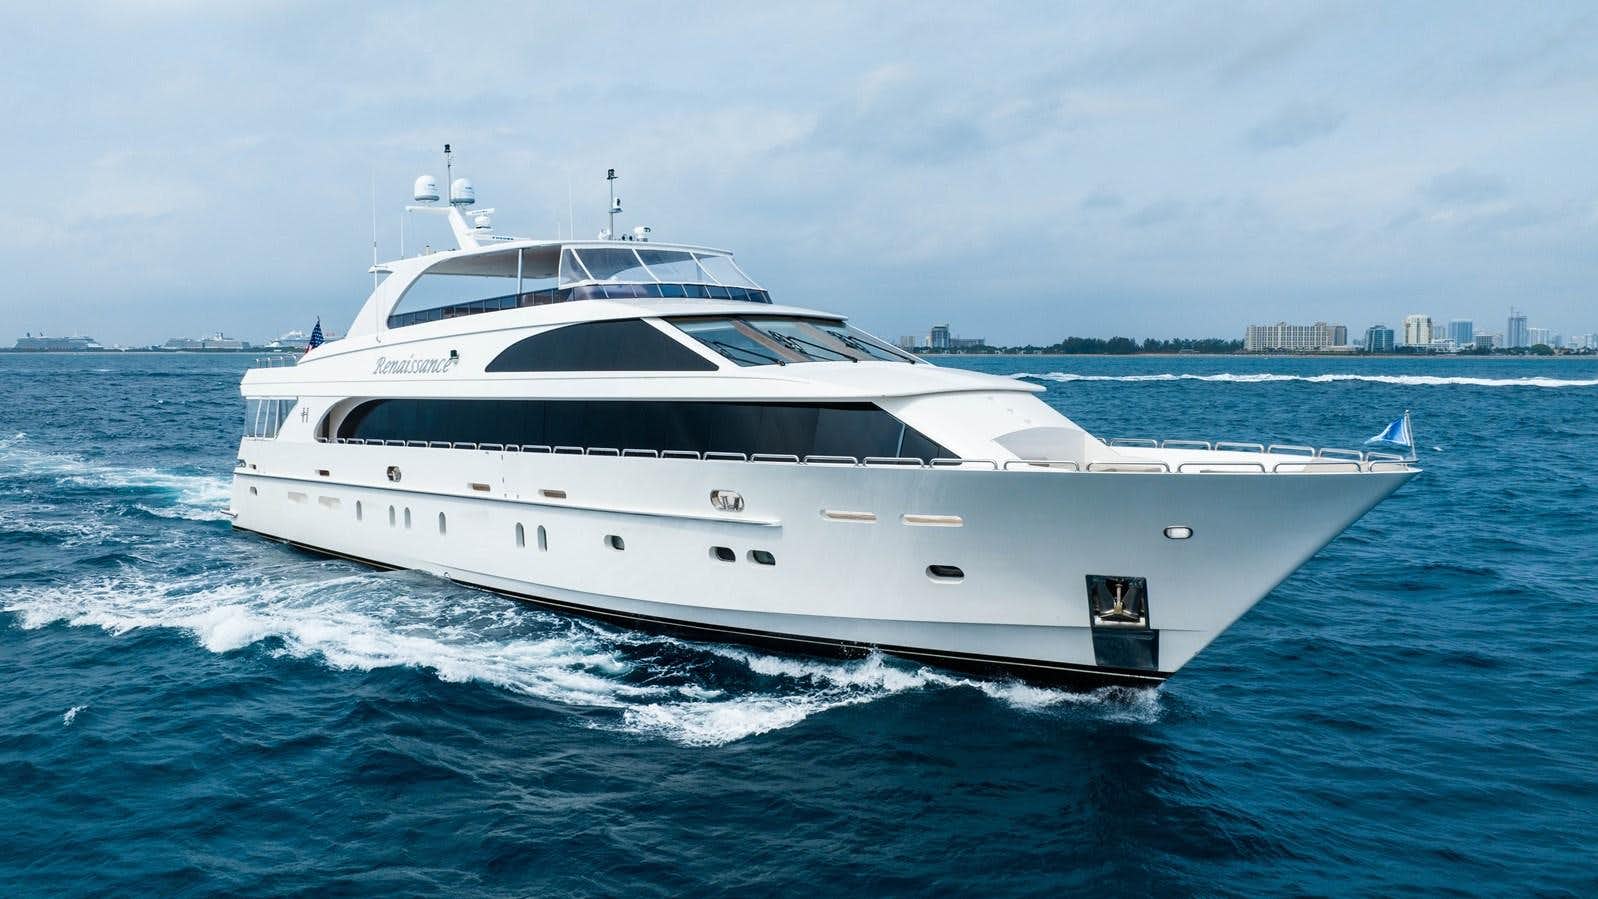 Watch Video for RENAISSANCE Yacht for Sale